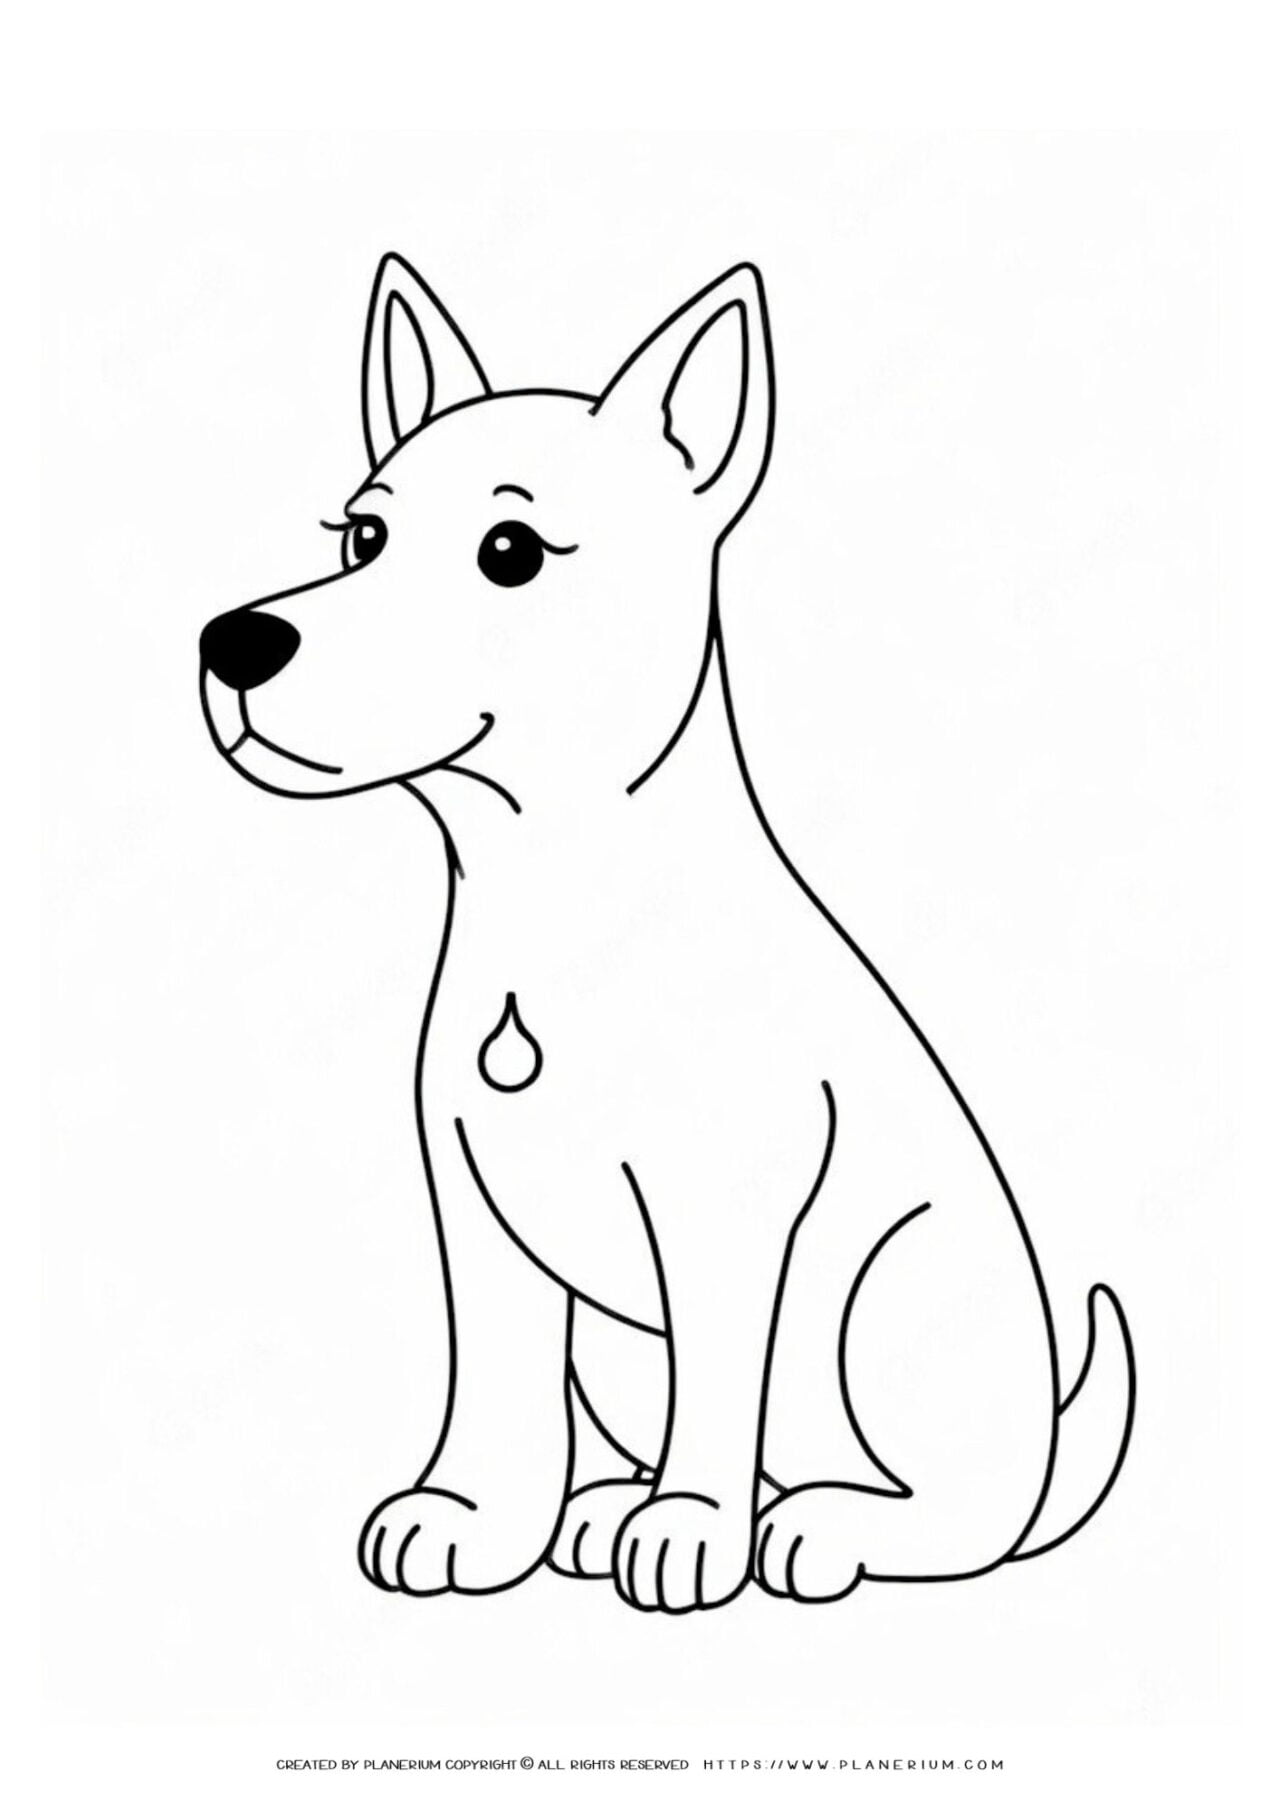 Dog line art for coloring activity.